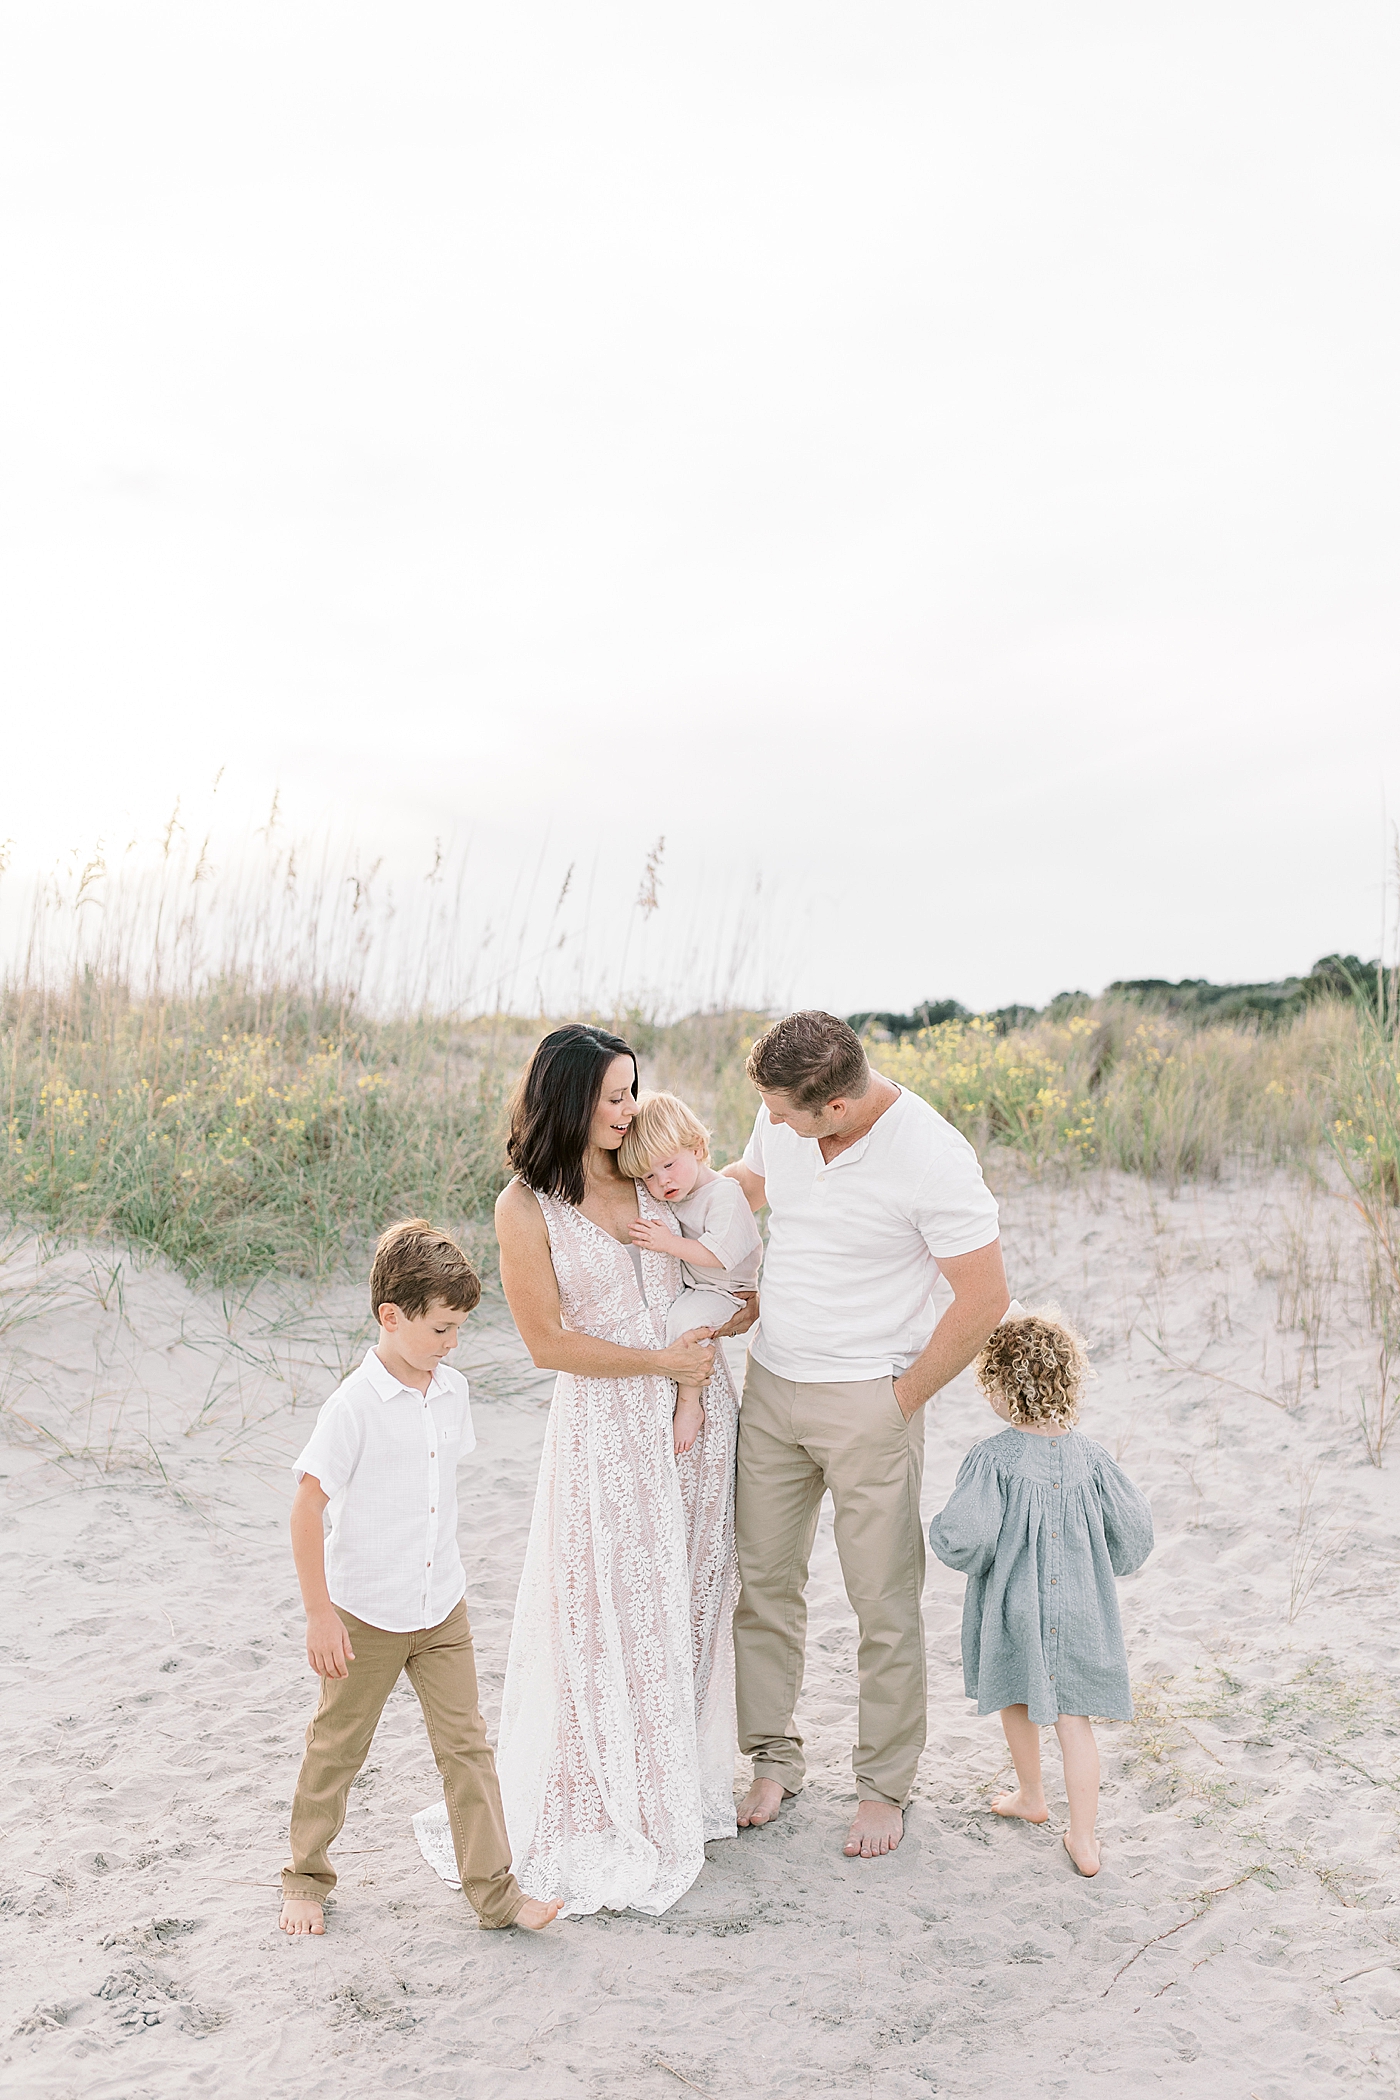 Family snuggling together during fall family session at beach | Photo by Caitlyn Motycka Photography